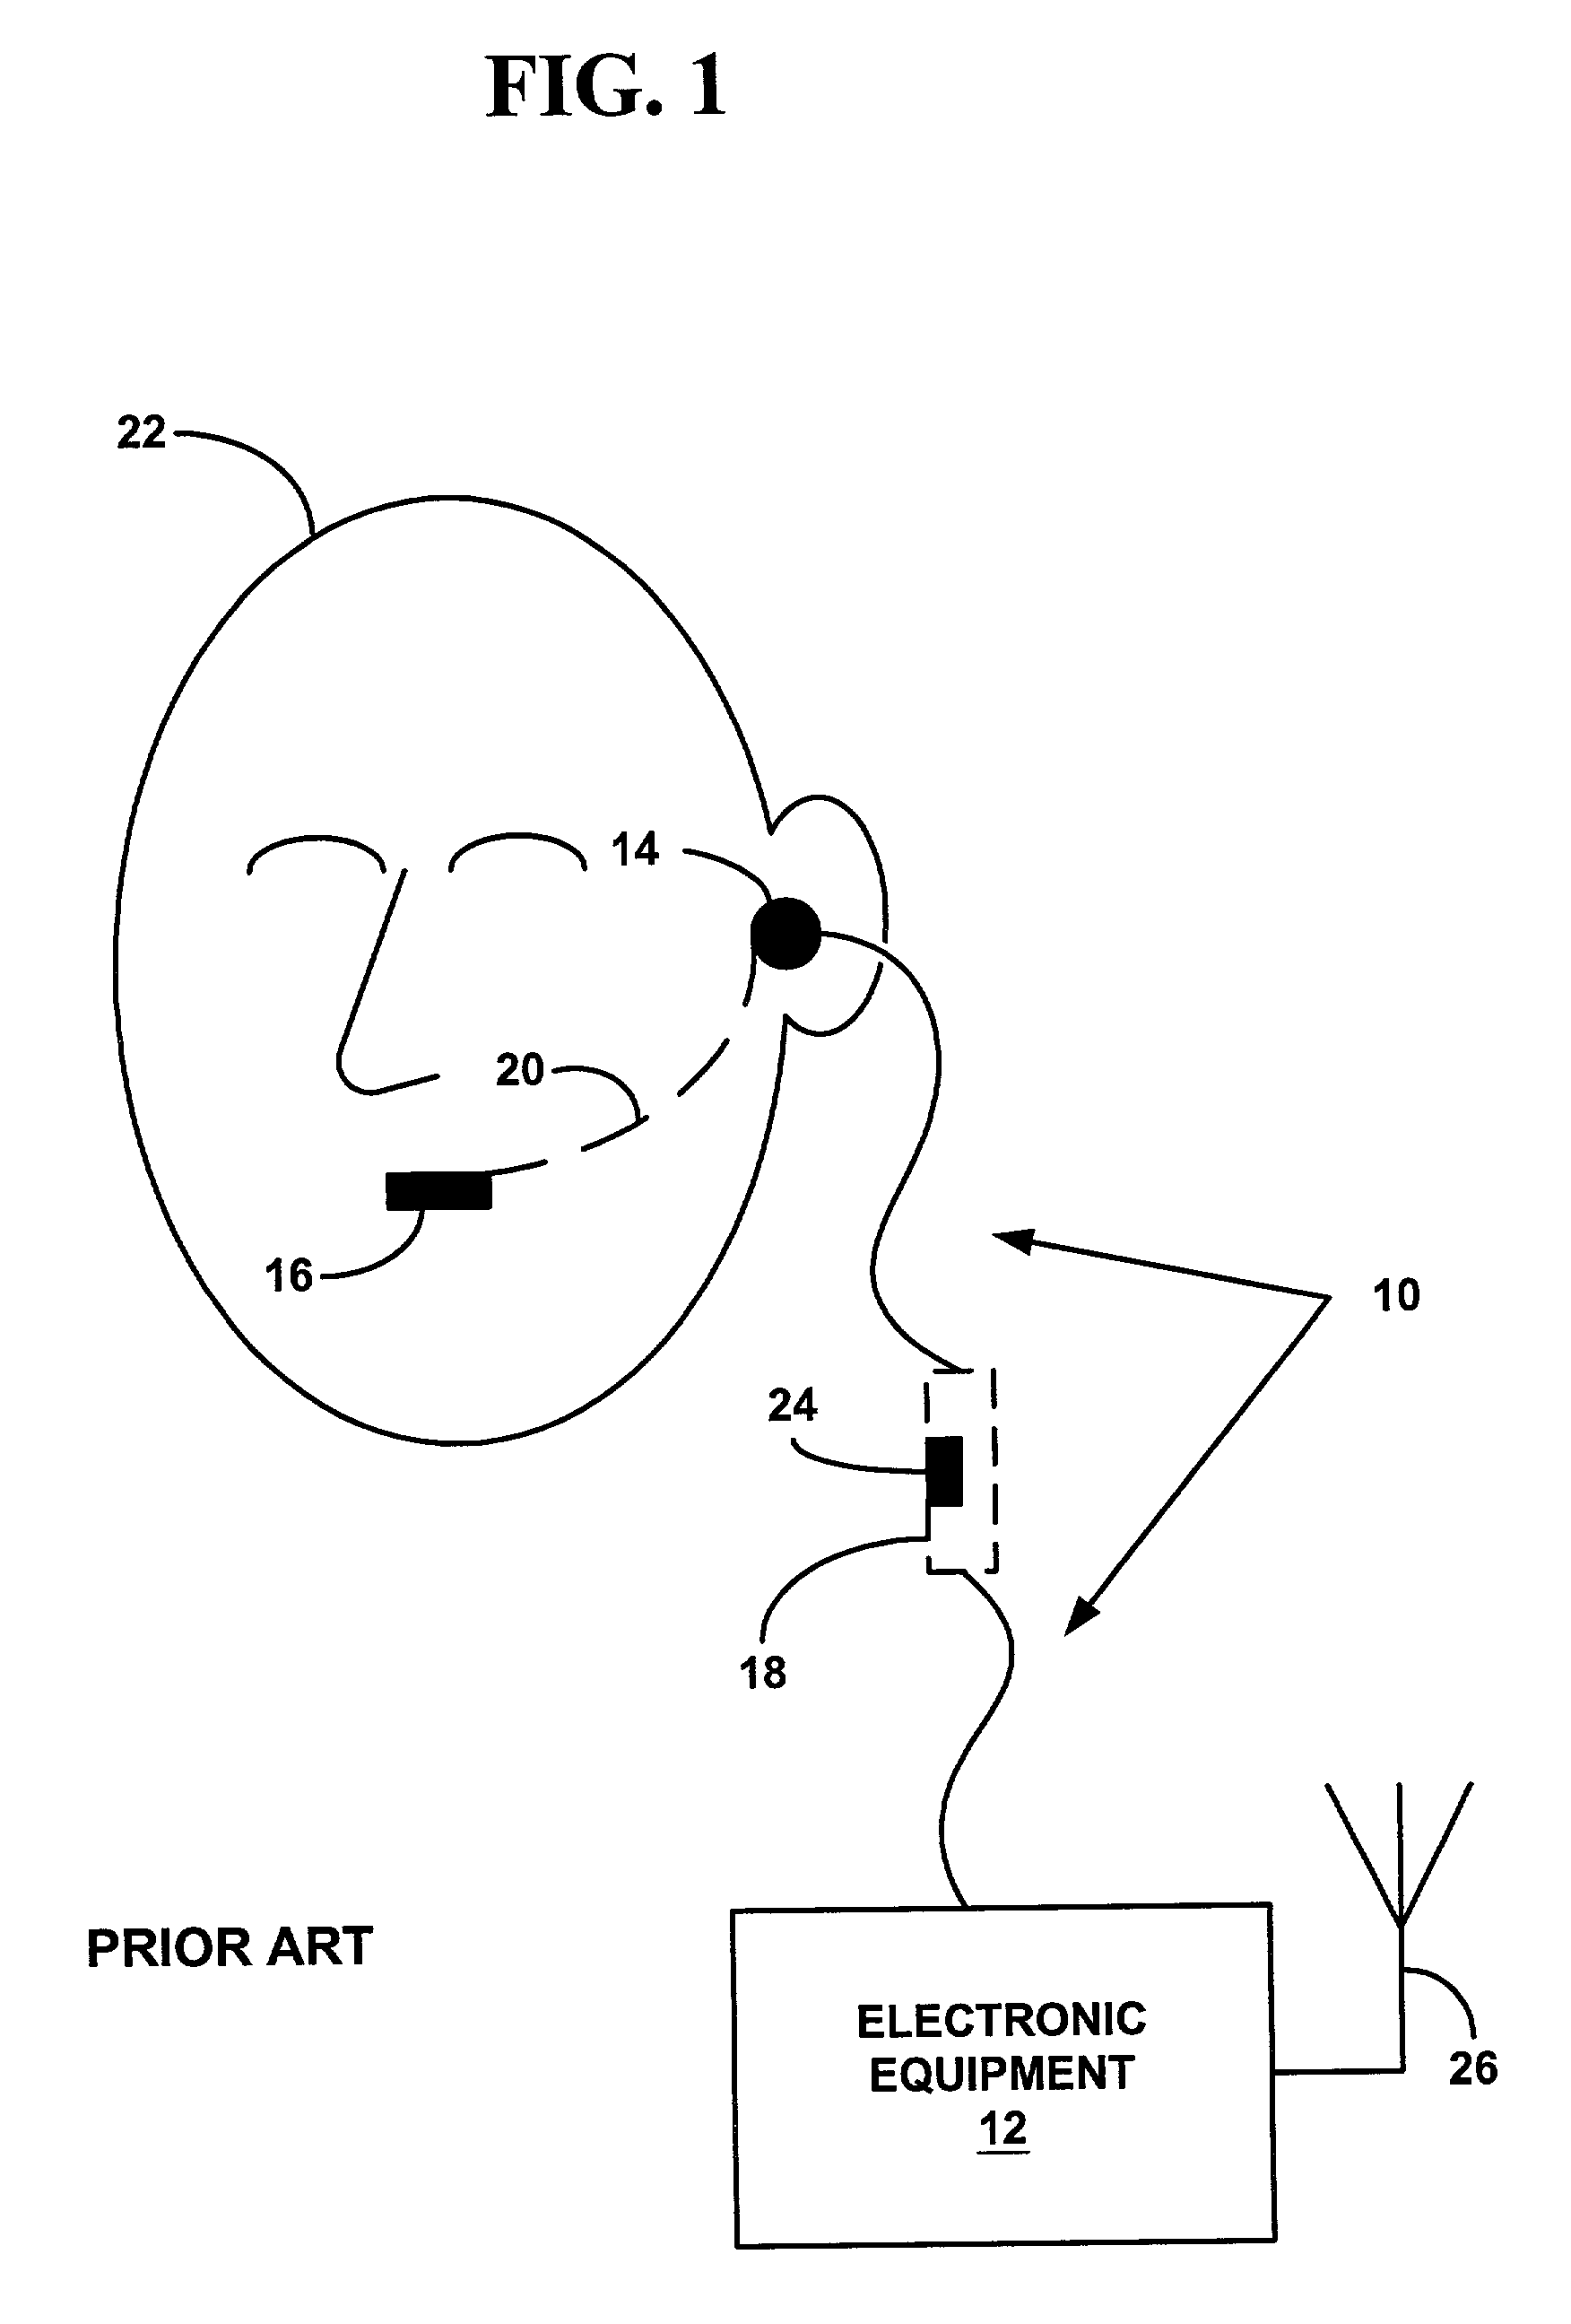 Optically coupled headset and microphone